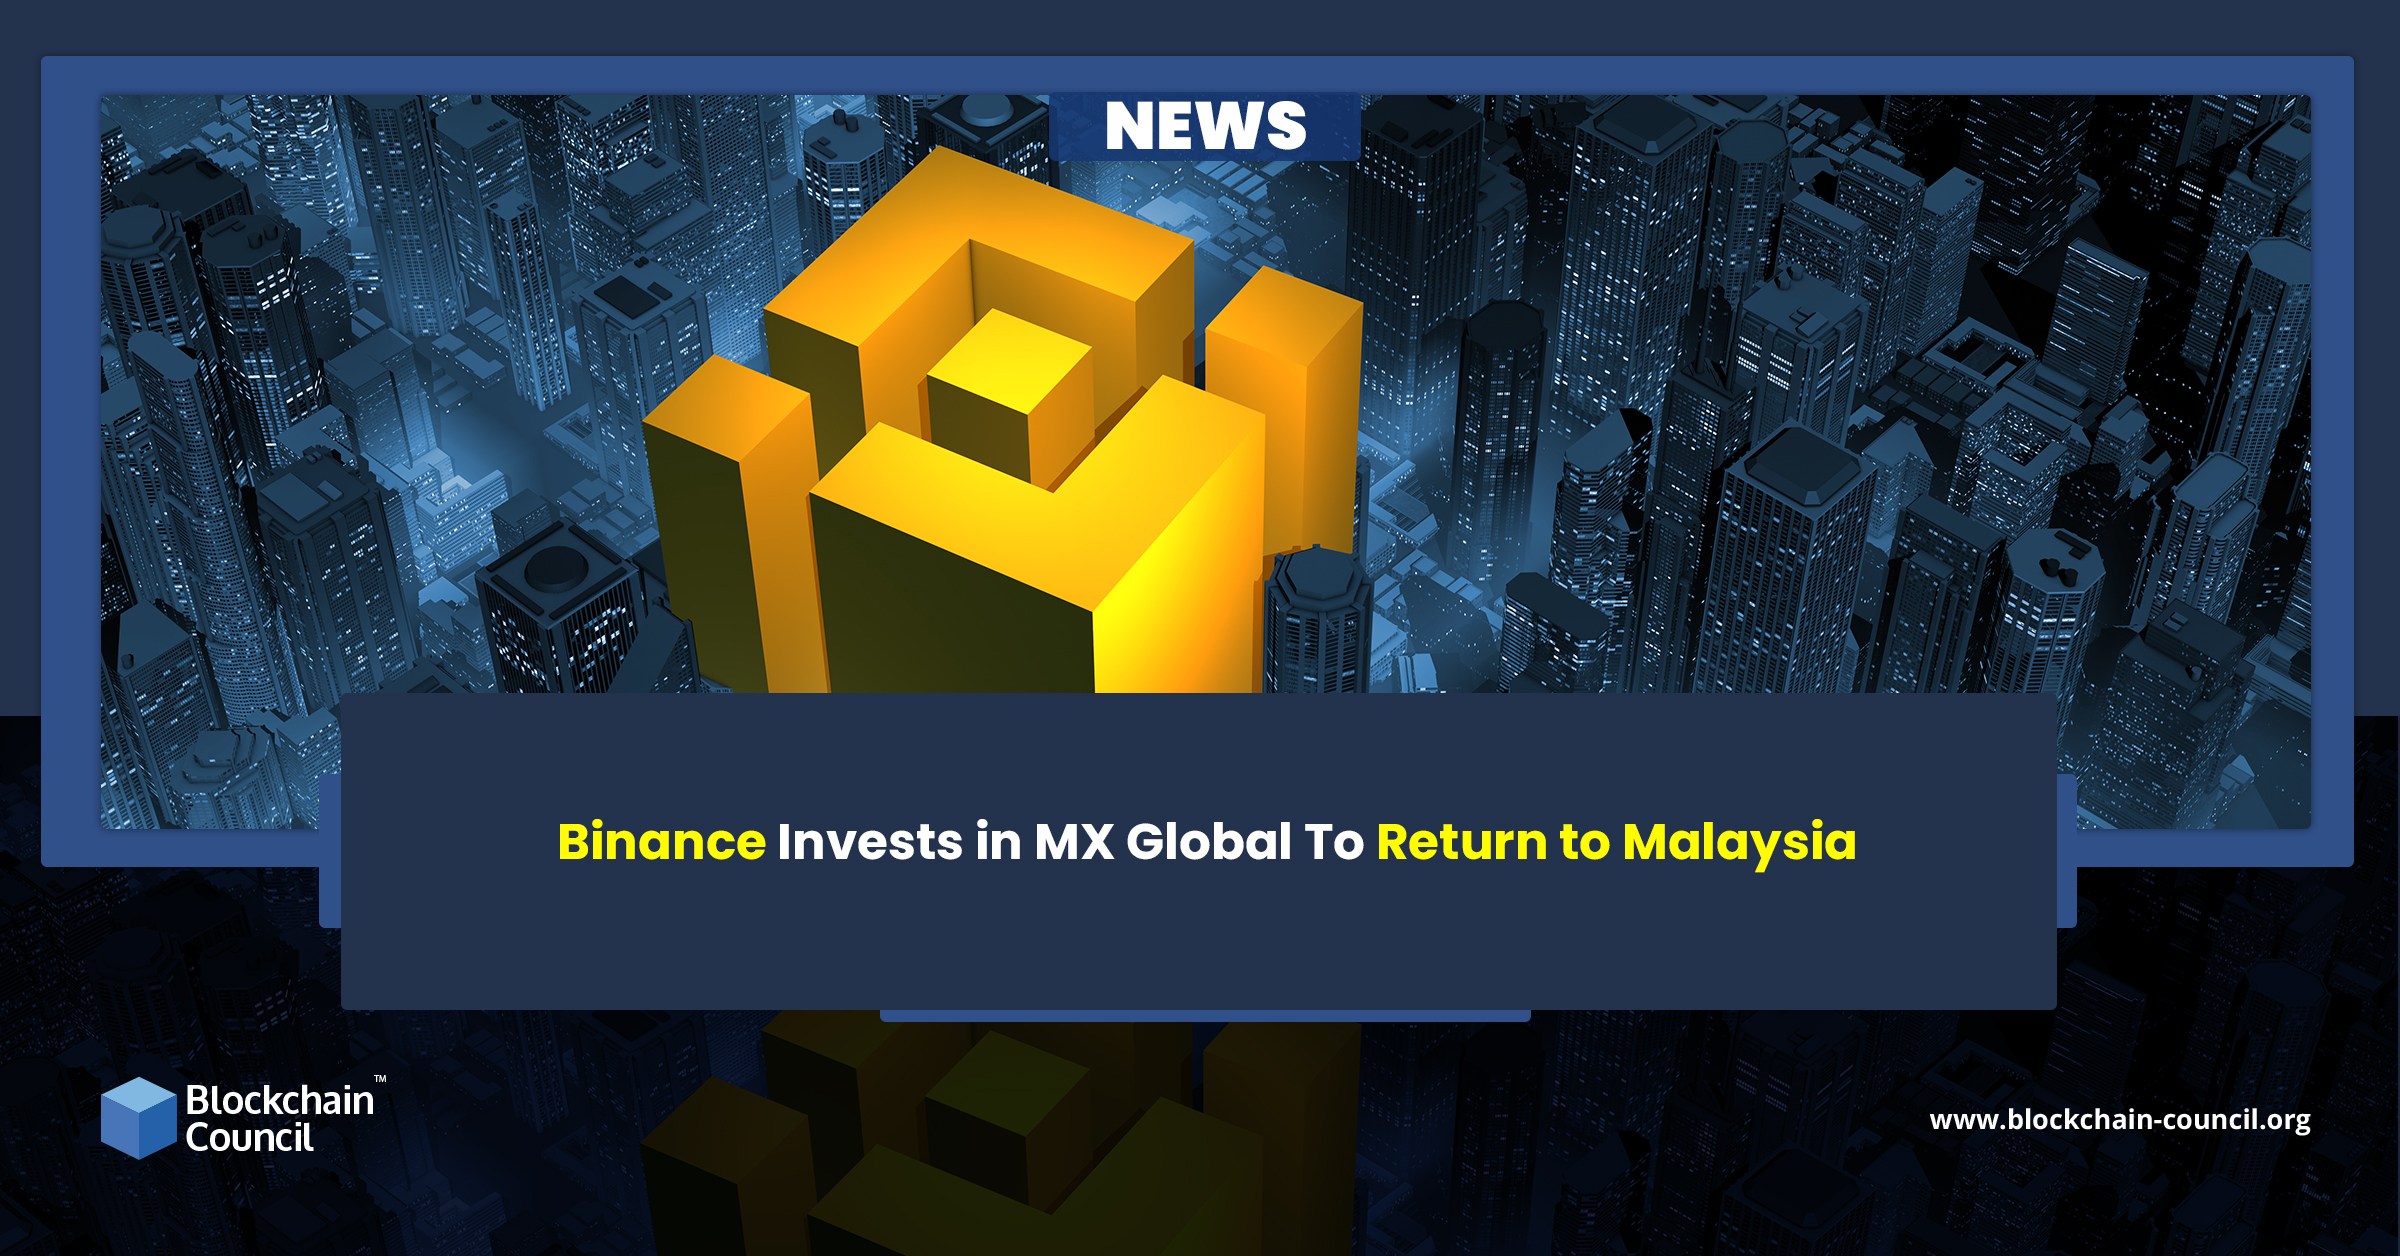 Binance Invests in MX Global To Return to Malaysia